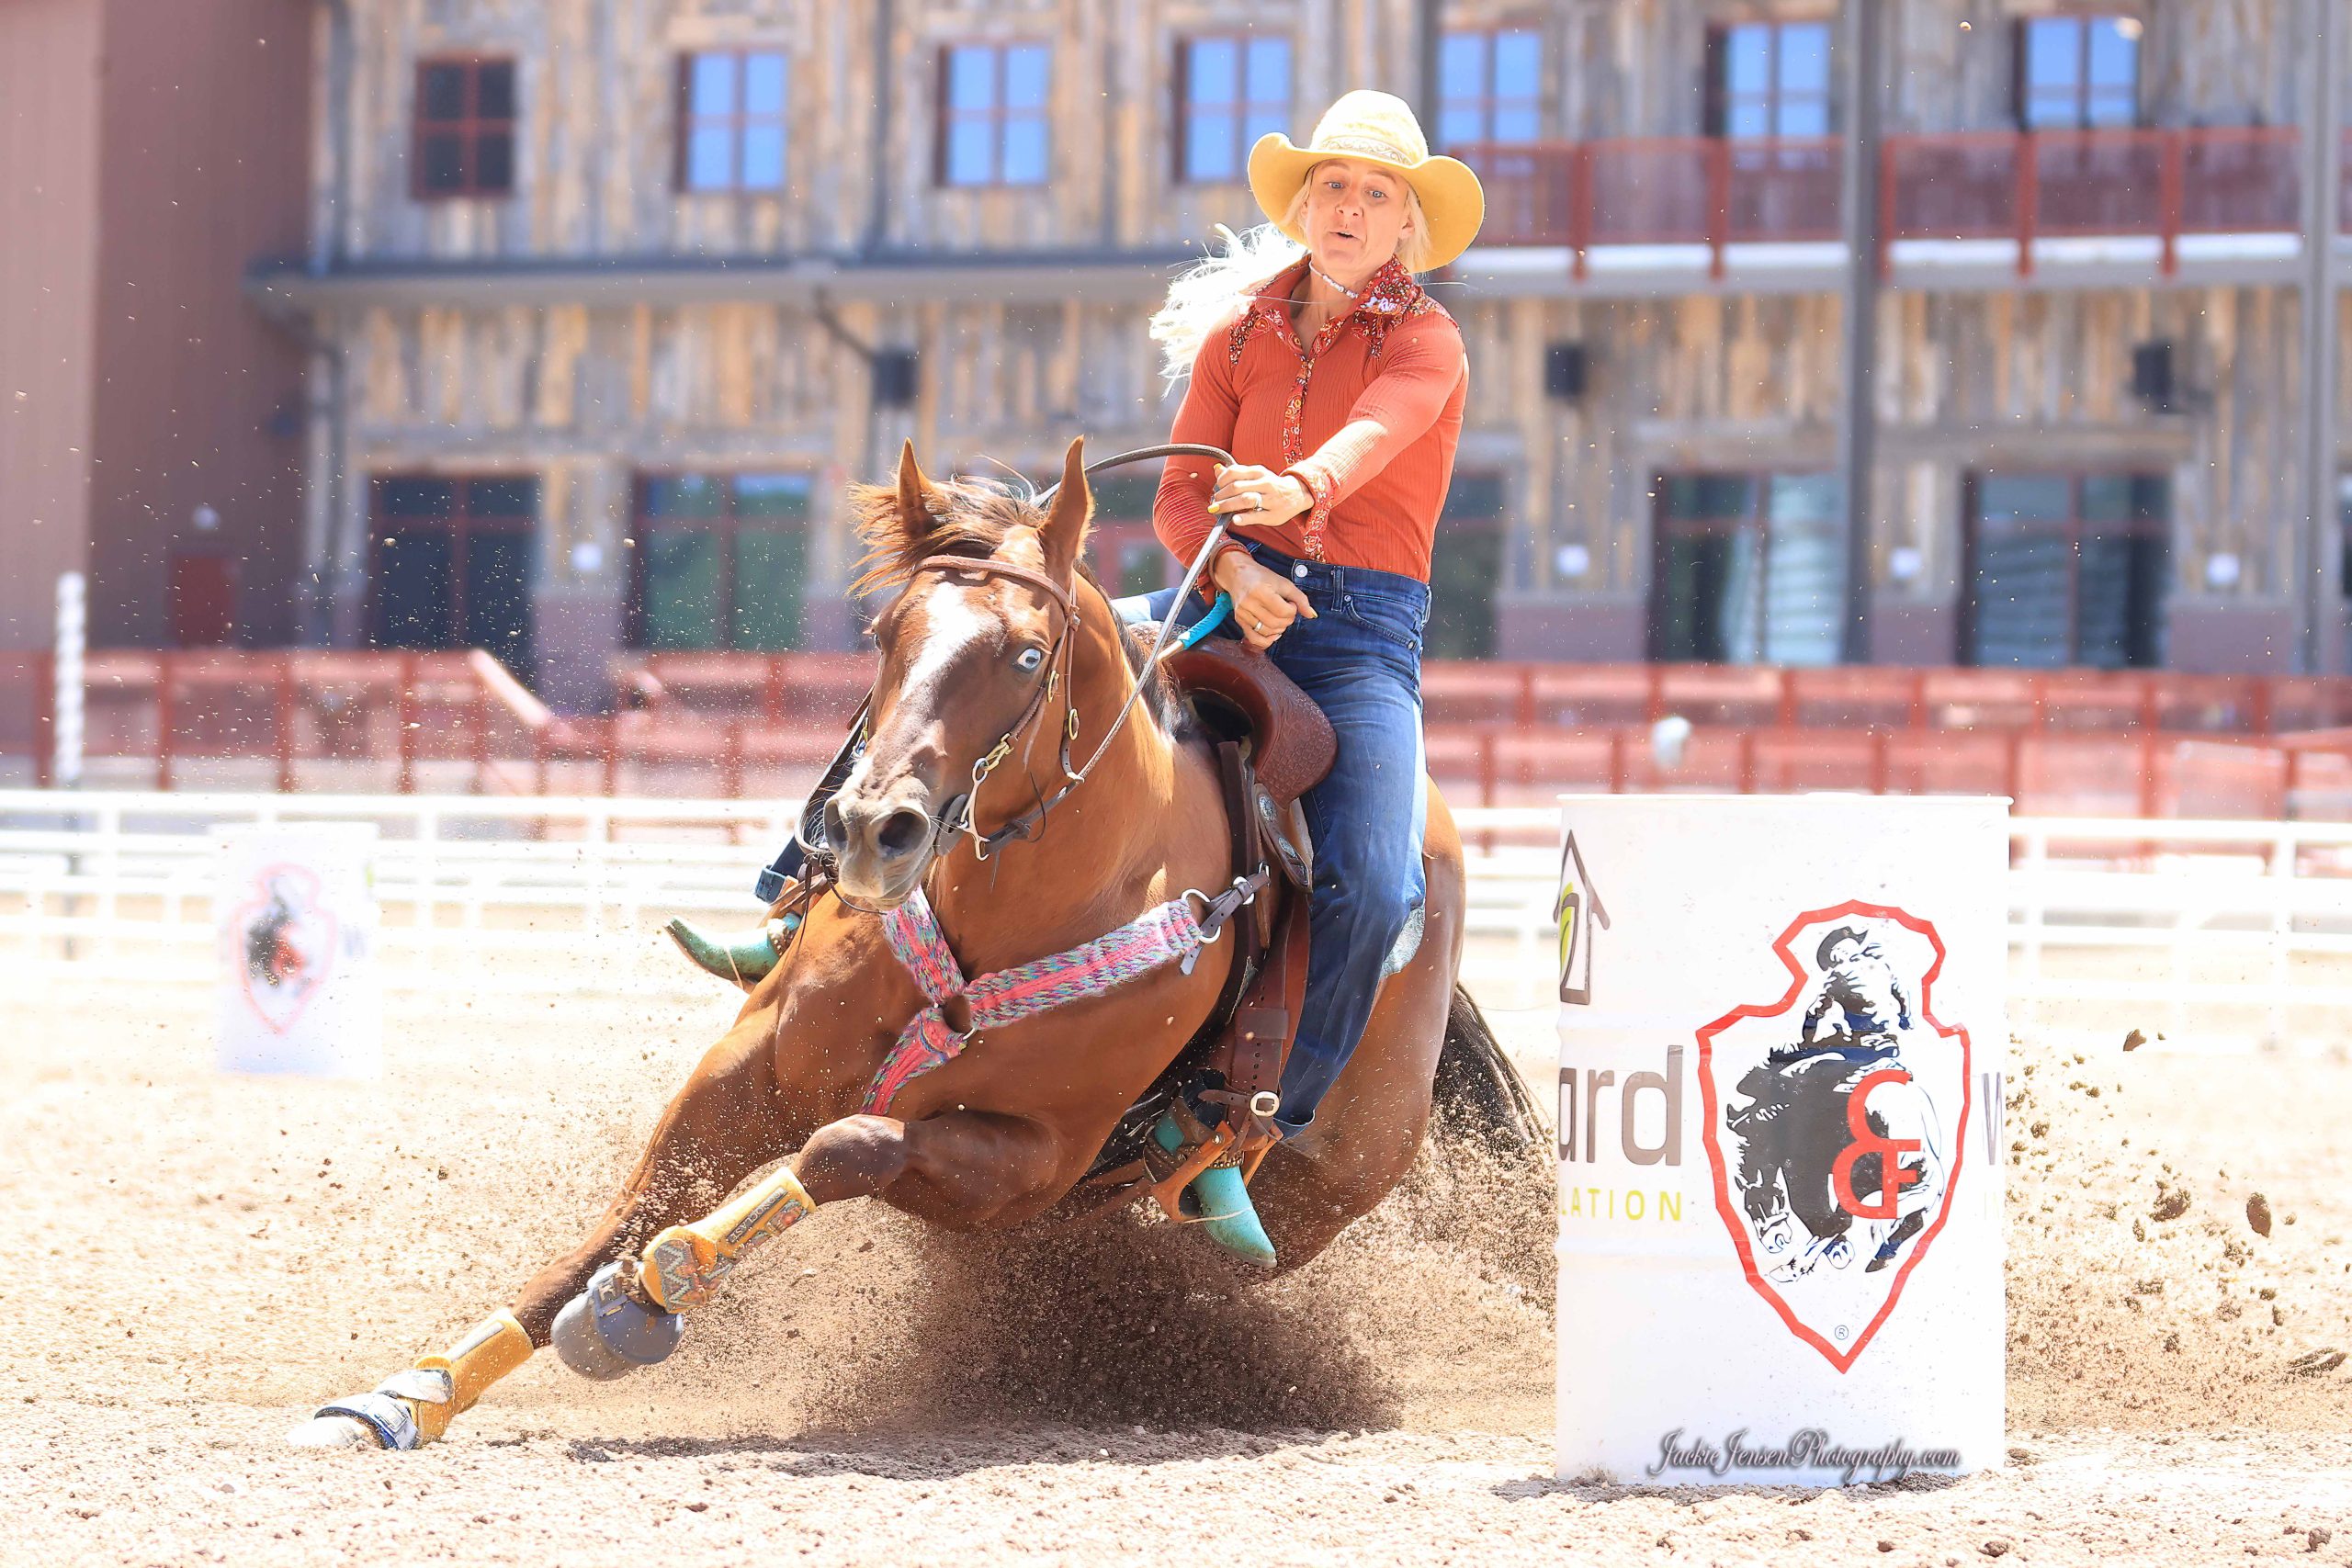 Barrel Racing A young cowgirl with long blond hair in a blue shirt rides on  the